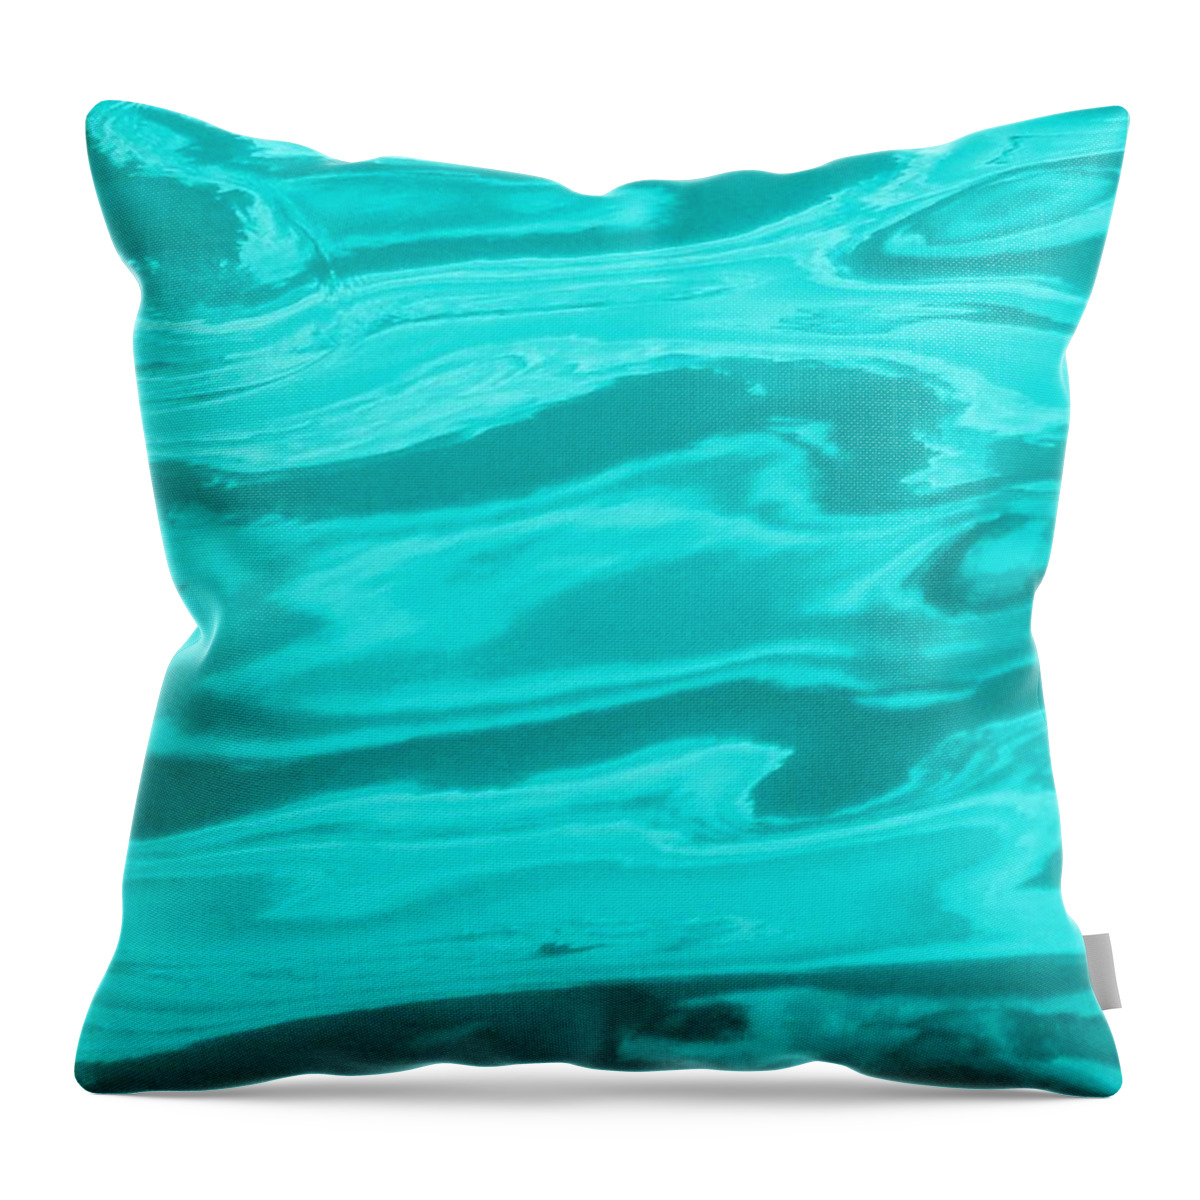 Multi Panel Throw Pillow featuring the digital art Colored Wave Blue Panel Two by Stephen Jorgensen